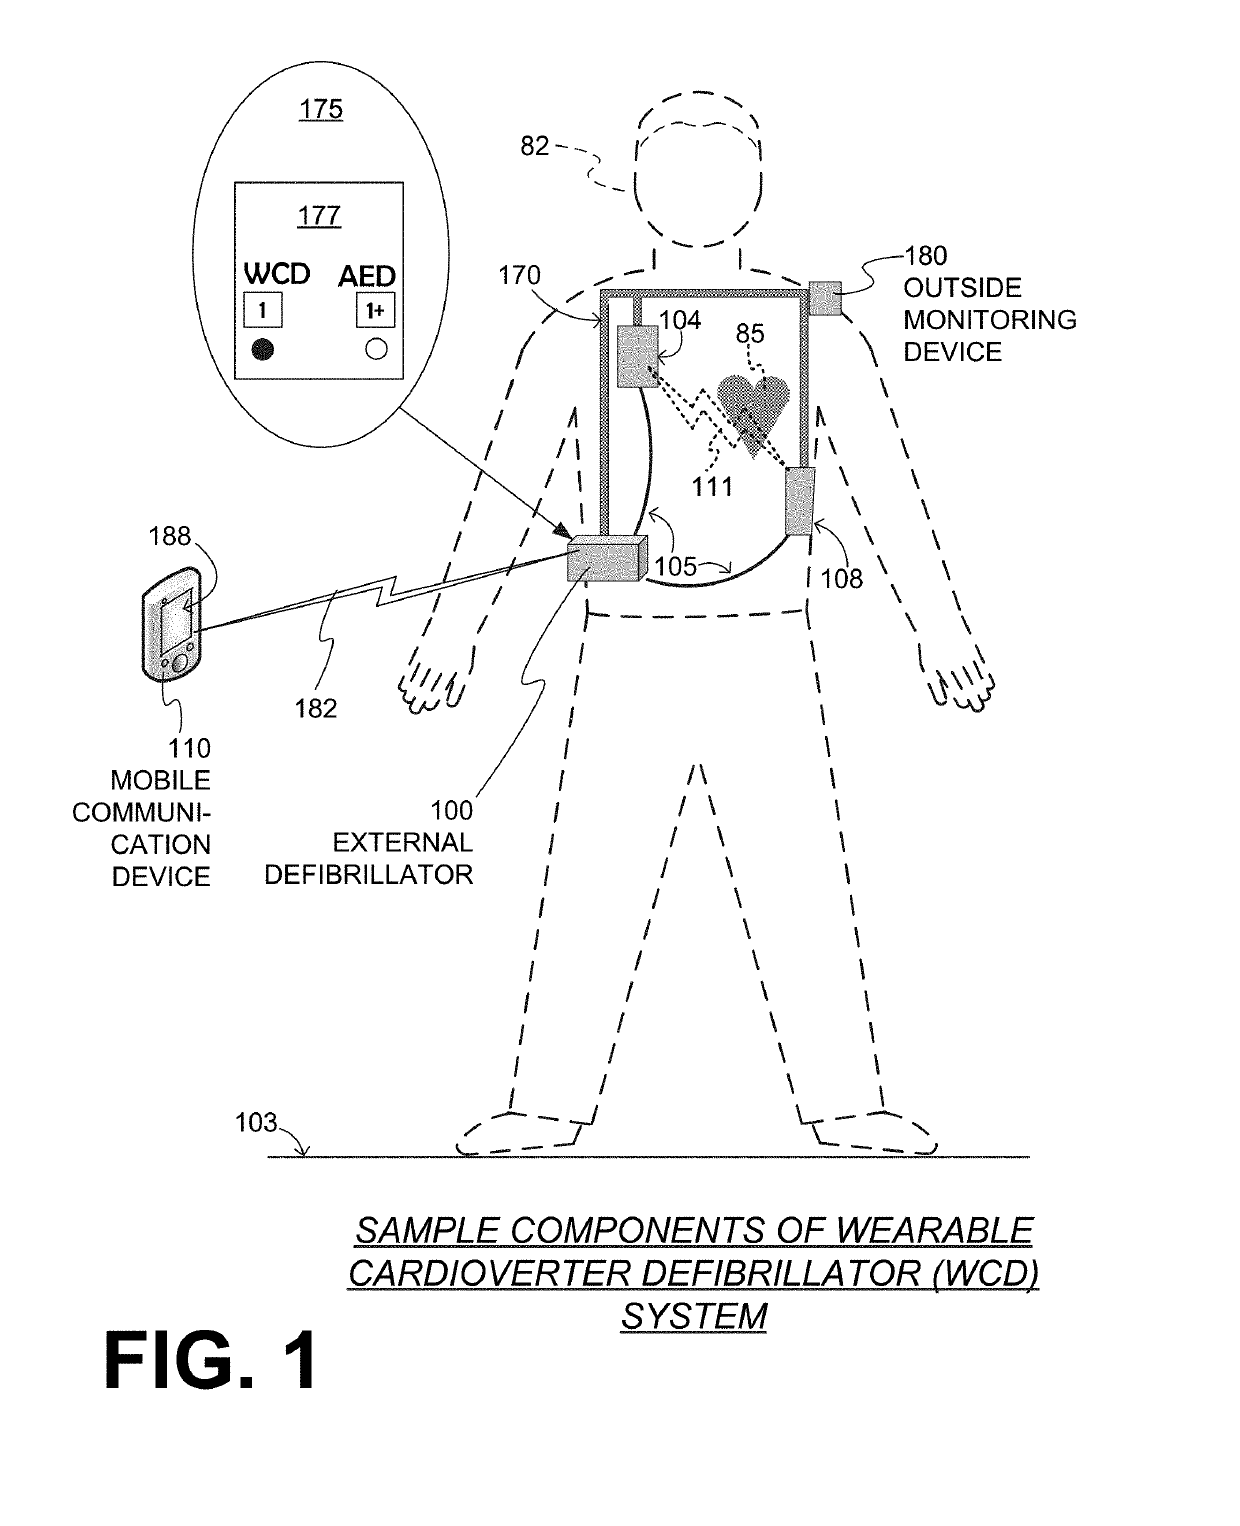 Wearable cardioverter defibrillator (WCD) system having wcd mode and also aed mode